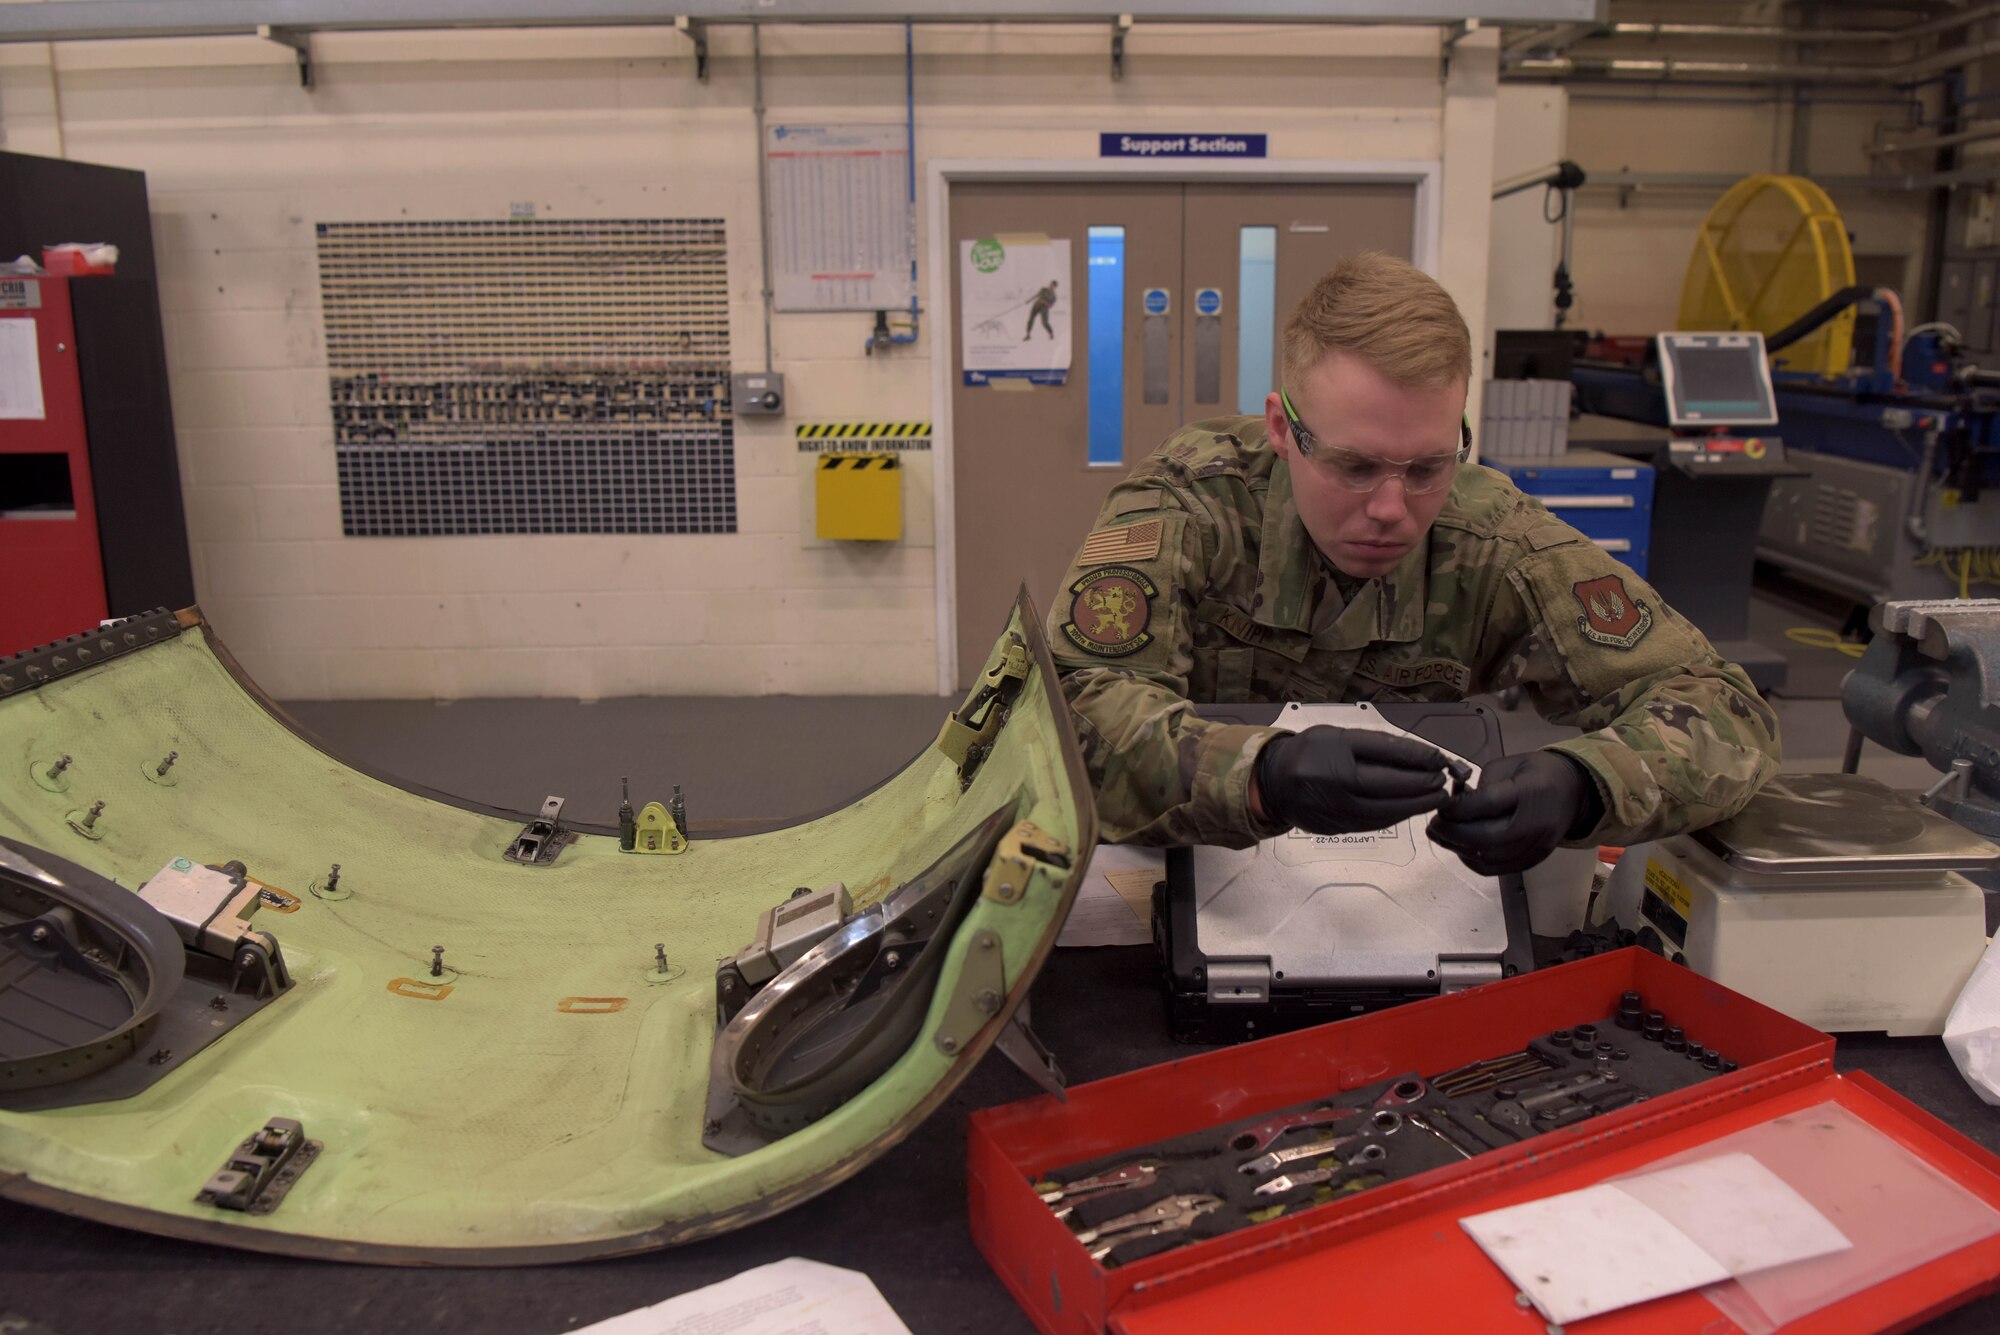 Senior Airman Chase Knipp, 100th Maintenance Squadron aircraft structural maintenance journeyman, grabs a tool from his toolbox at RAF Mildenhall, England, Jan. 14, 2020. The sheet metal shop, which also includes the corrosion control section, is responsible for the structural integrity of all of RAF Mildenhall’s assigned aircraft. (U.S. Air Force photo by Senior Airman Benjamin Cooper)